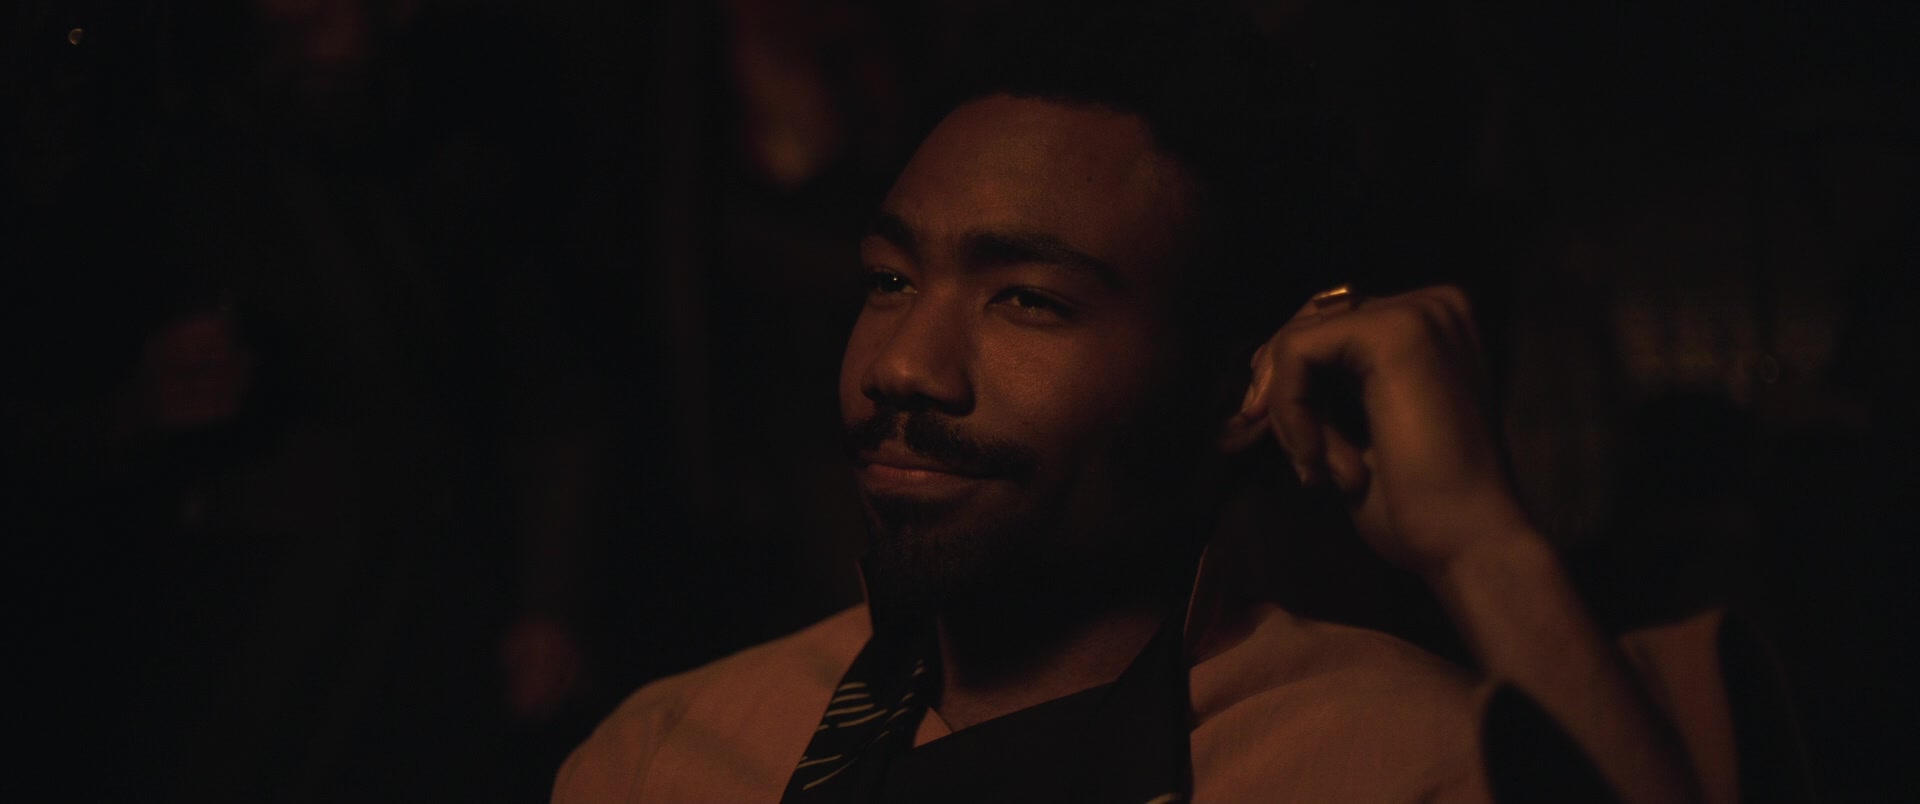 Lando Calrissian (Donald Glover) attempts to smooth talk his way out of a bad bet in Solo: A Star Wars Story (2018), Lucasfilm